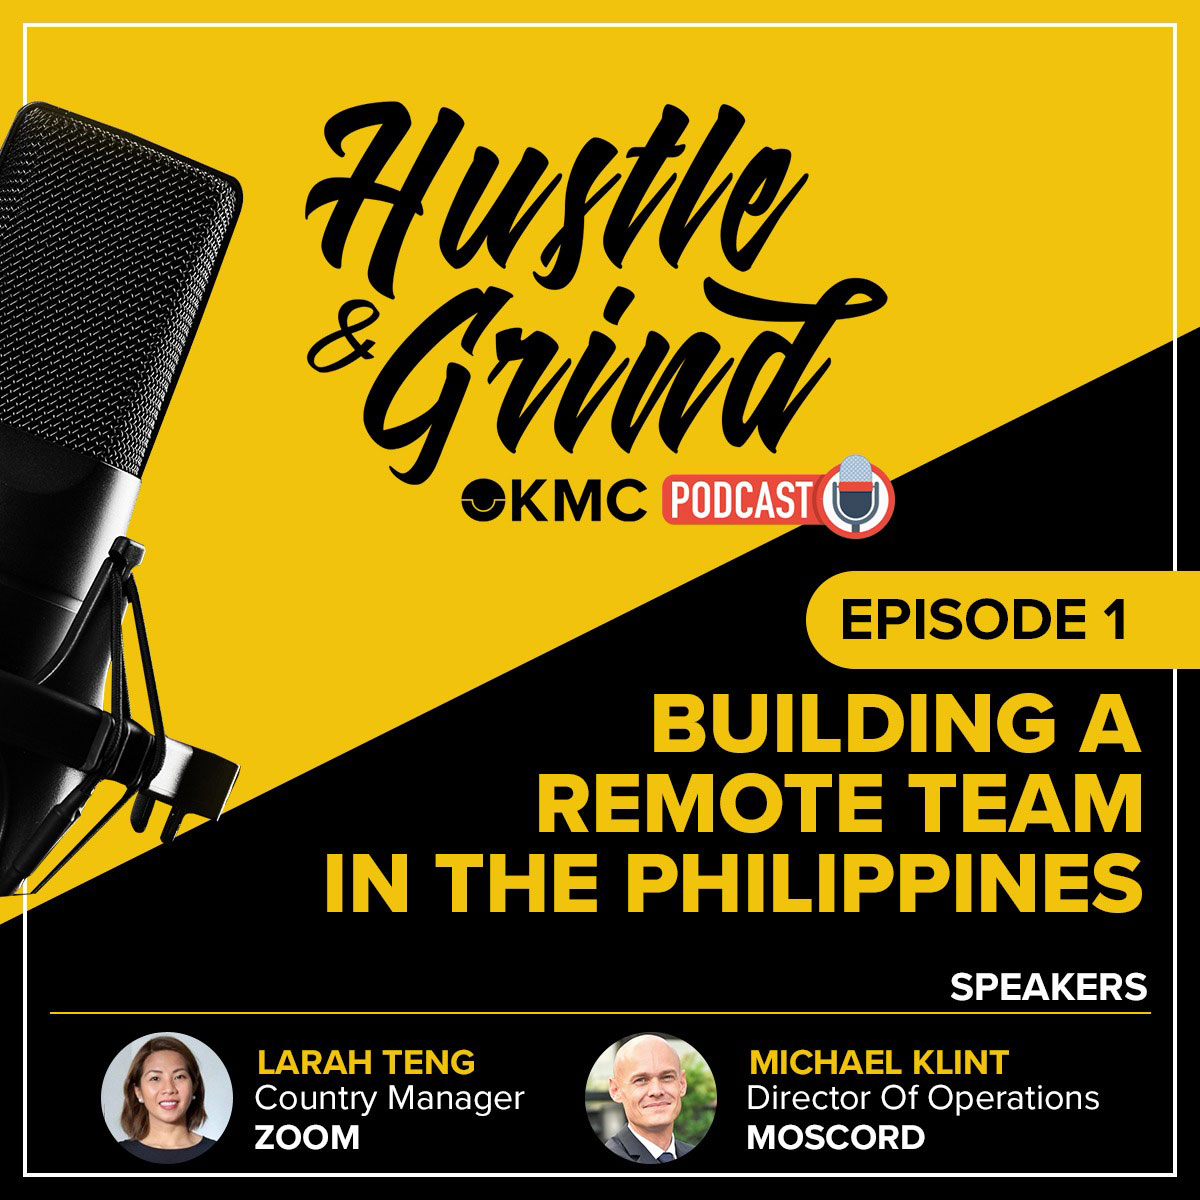 Hustle & Grind Podcast - Building a Remote Team in the Philippines